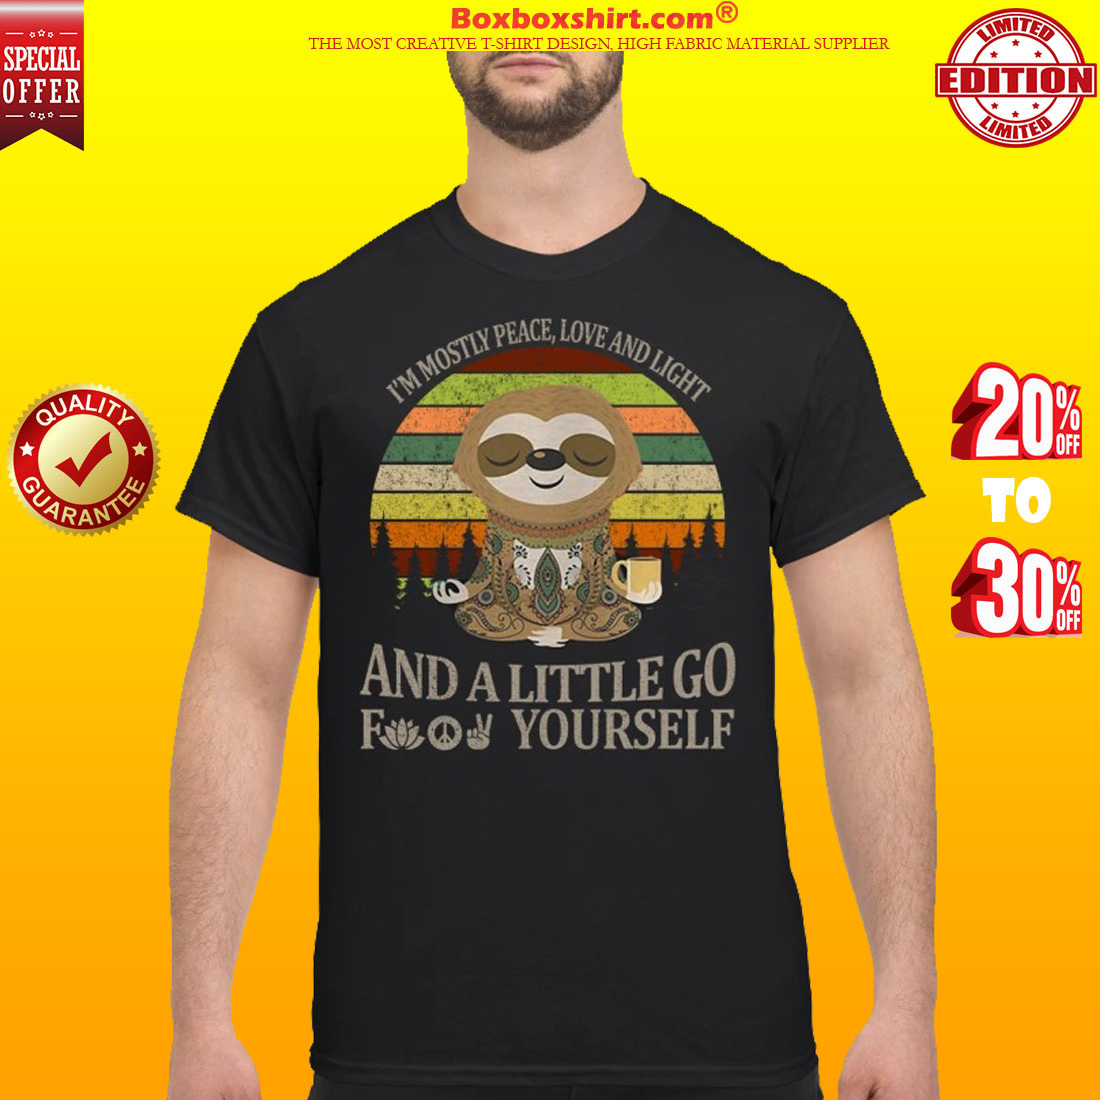 Sloth I'm mostly peace love and light and a little go fuck yourself classic shirt